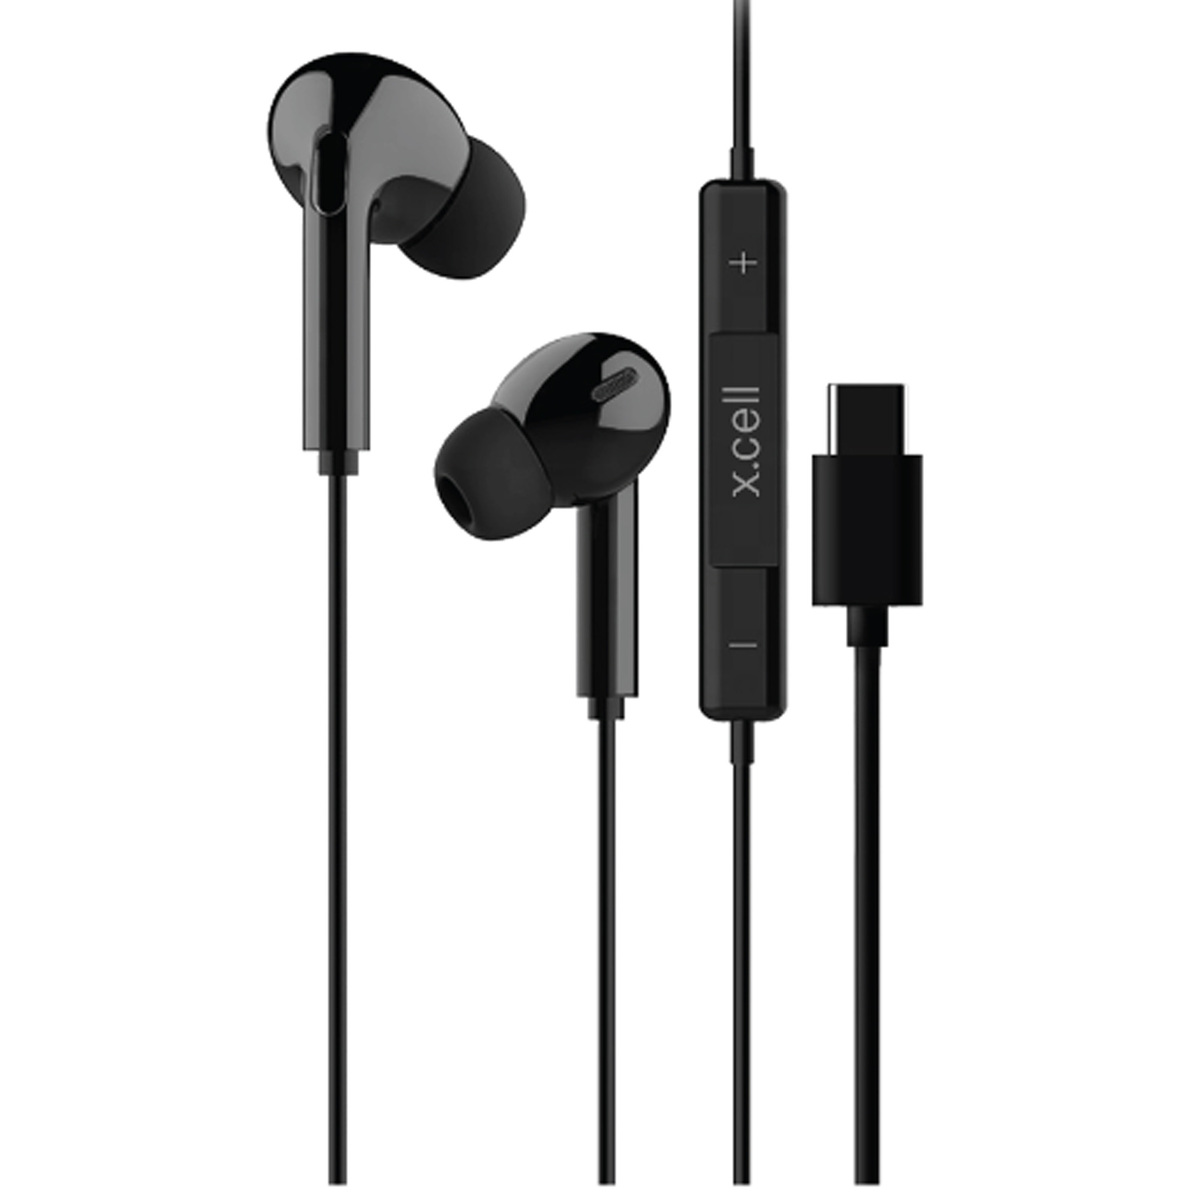 X.Cell Type-C Wired In Ear Stereo Headset HS103C,Black